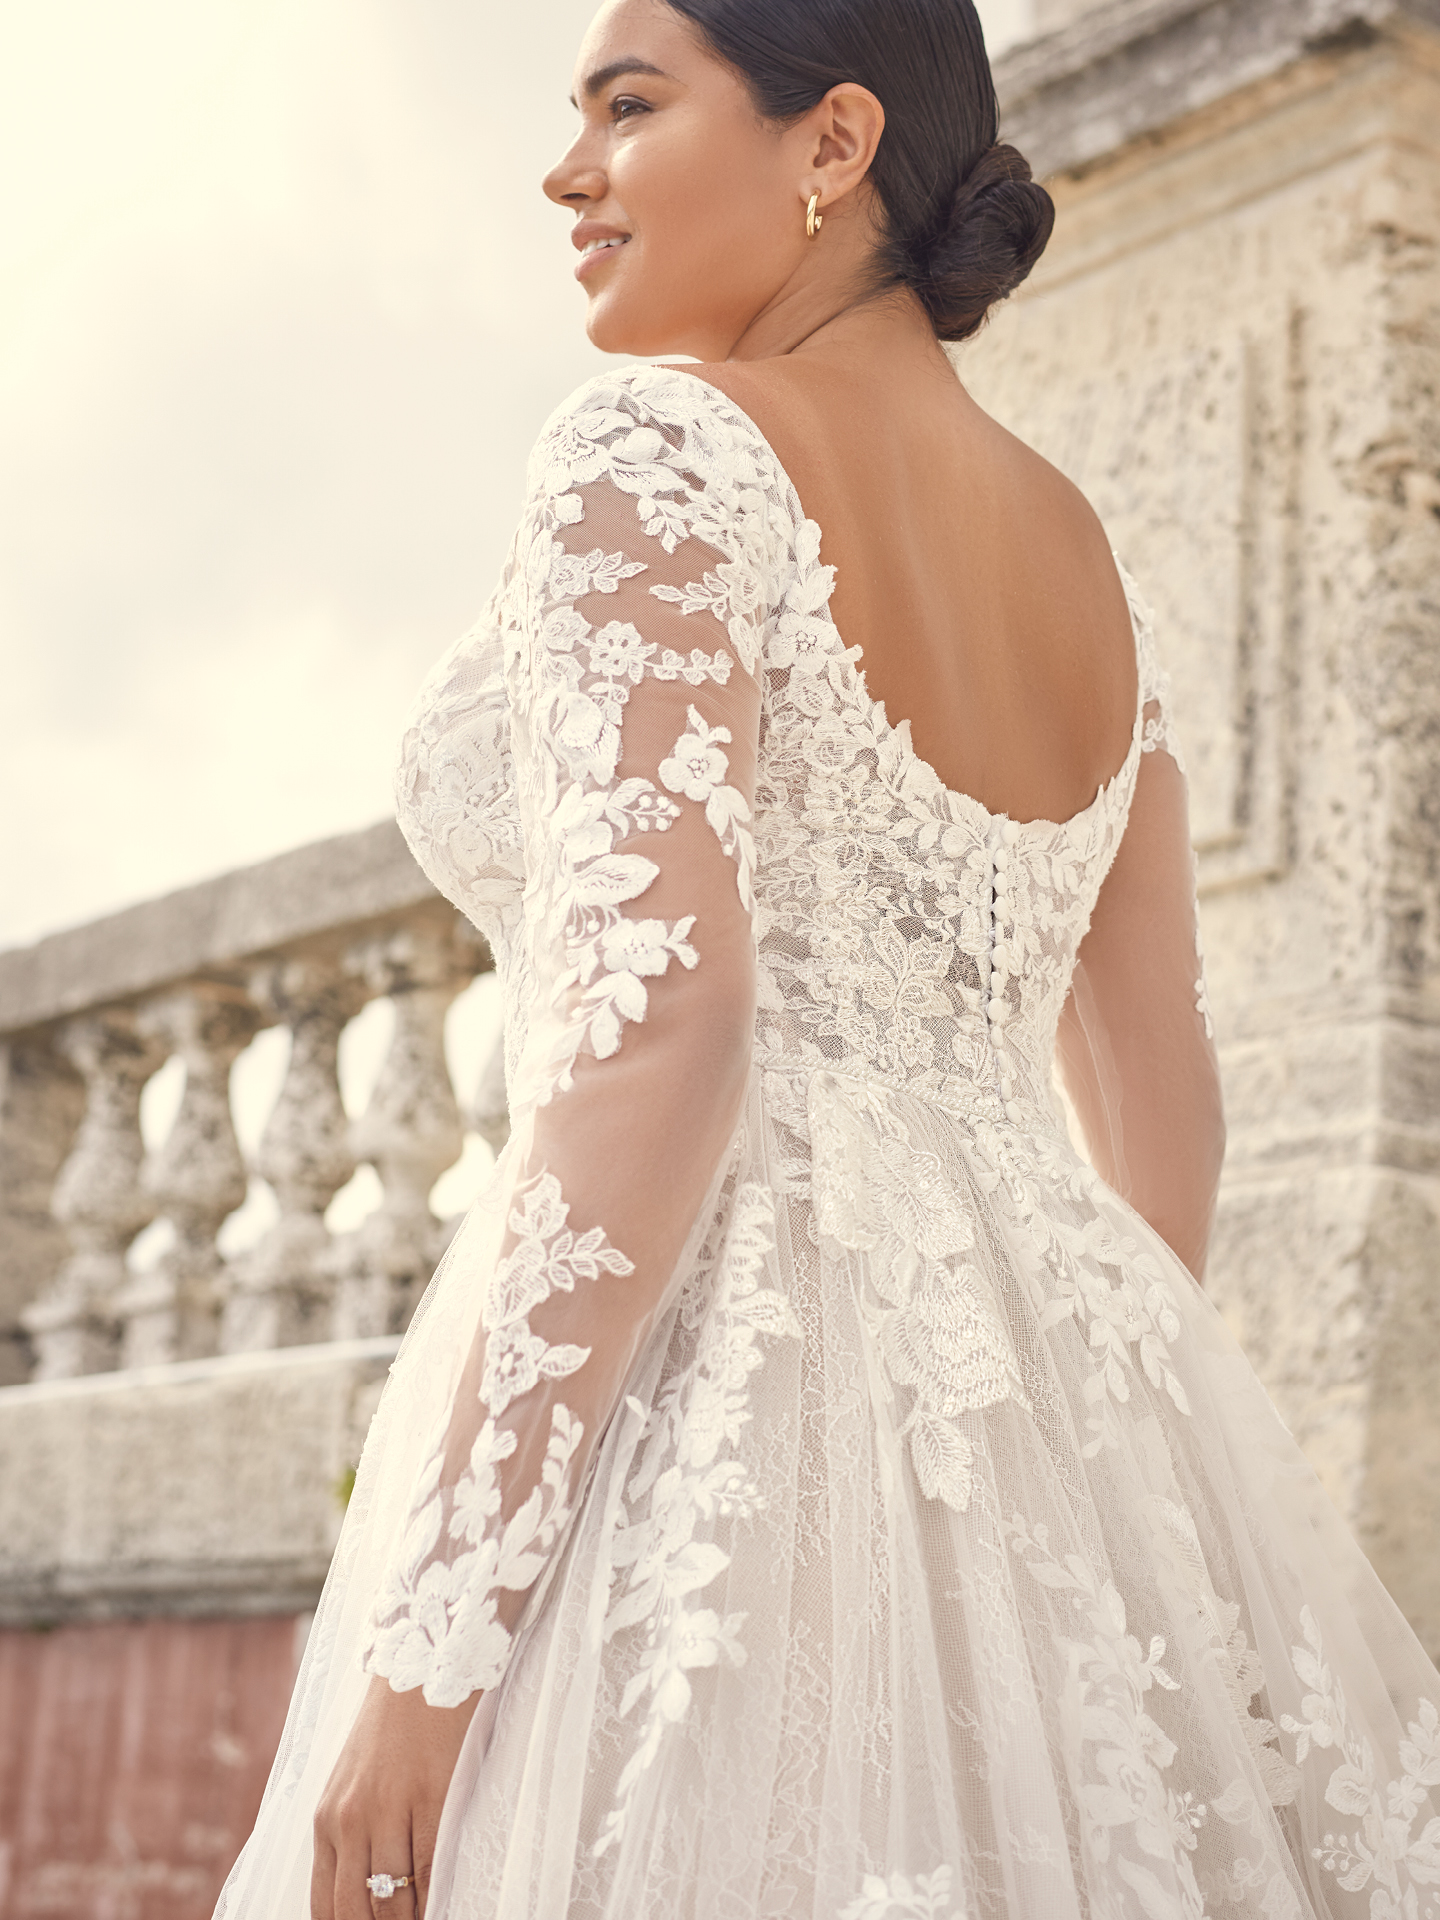 Bride Wearing Long Sleeve Floral Lace Wedding Gown Called Valona by Sottero and Midgley